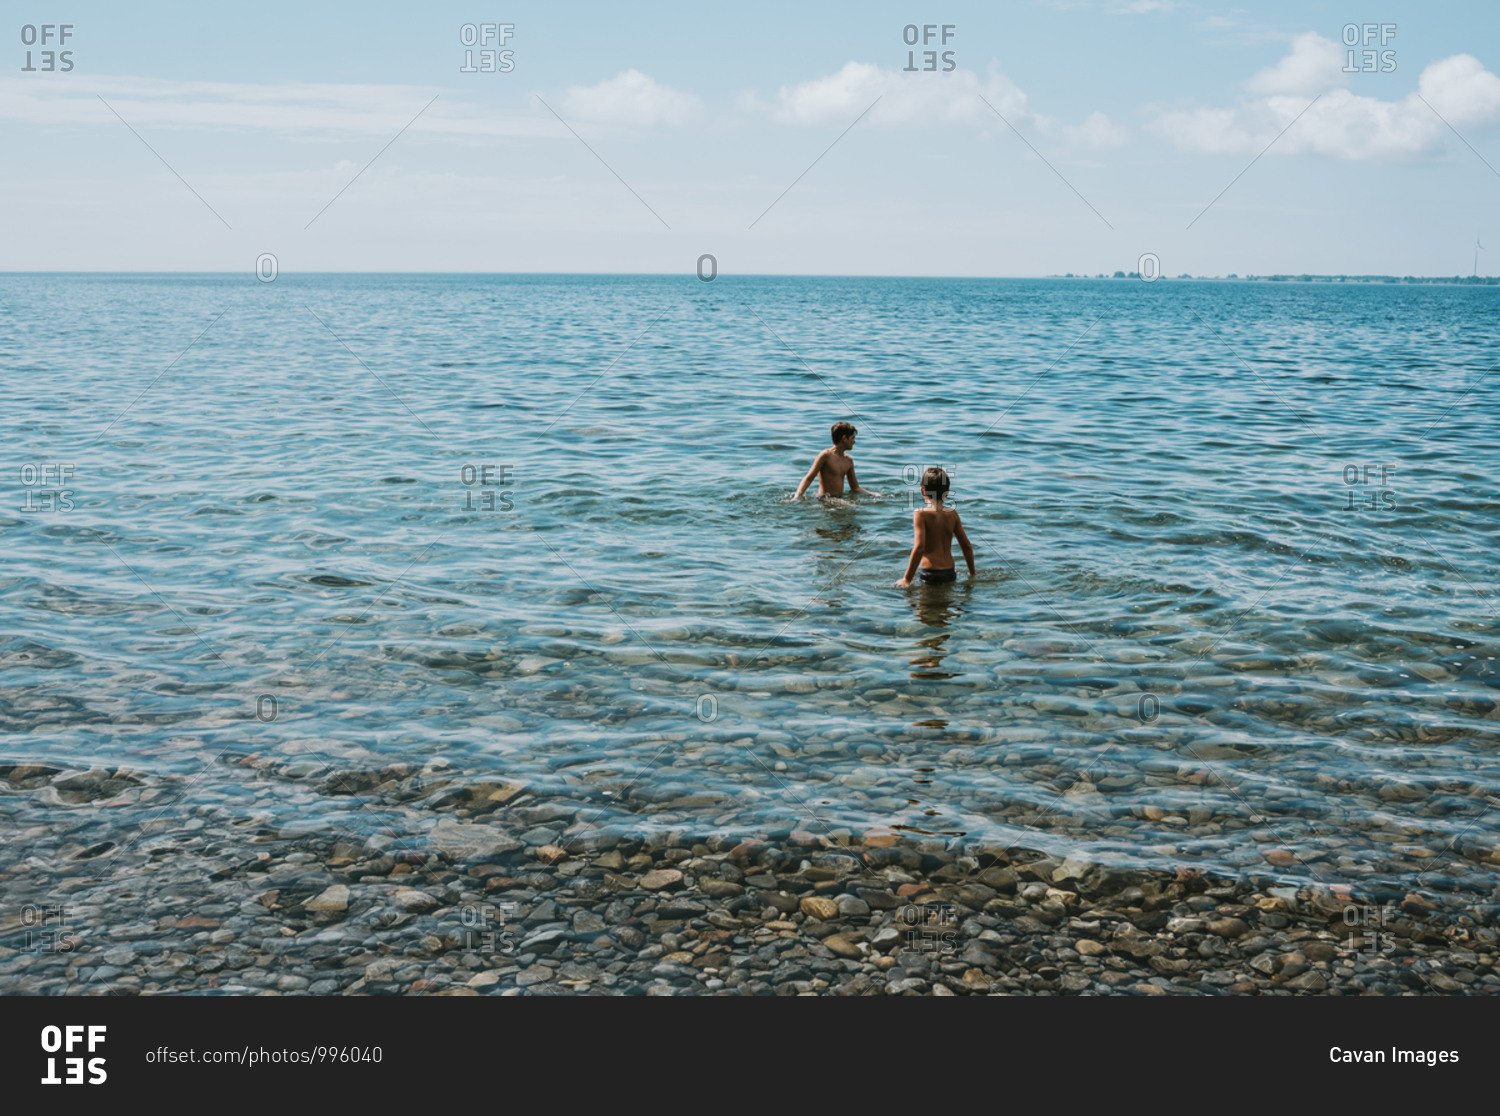 Two boys wading in lake ontario on a summer day.